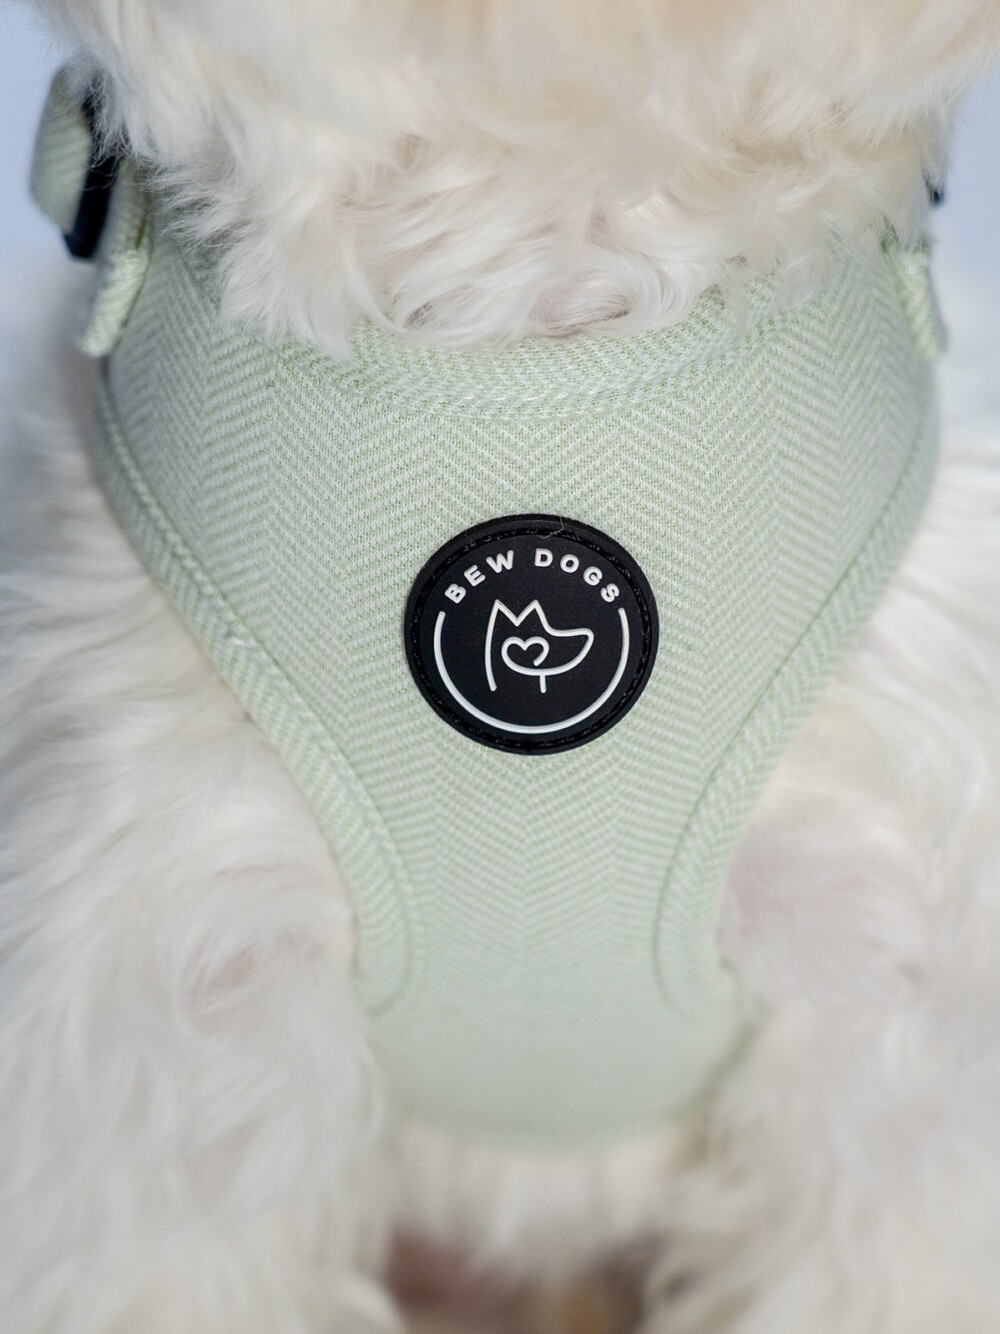 A close up of a mint green harness on a white dog with the Bew Dogs logo